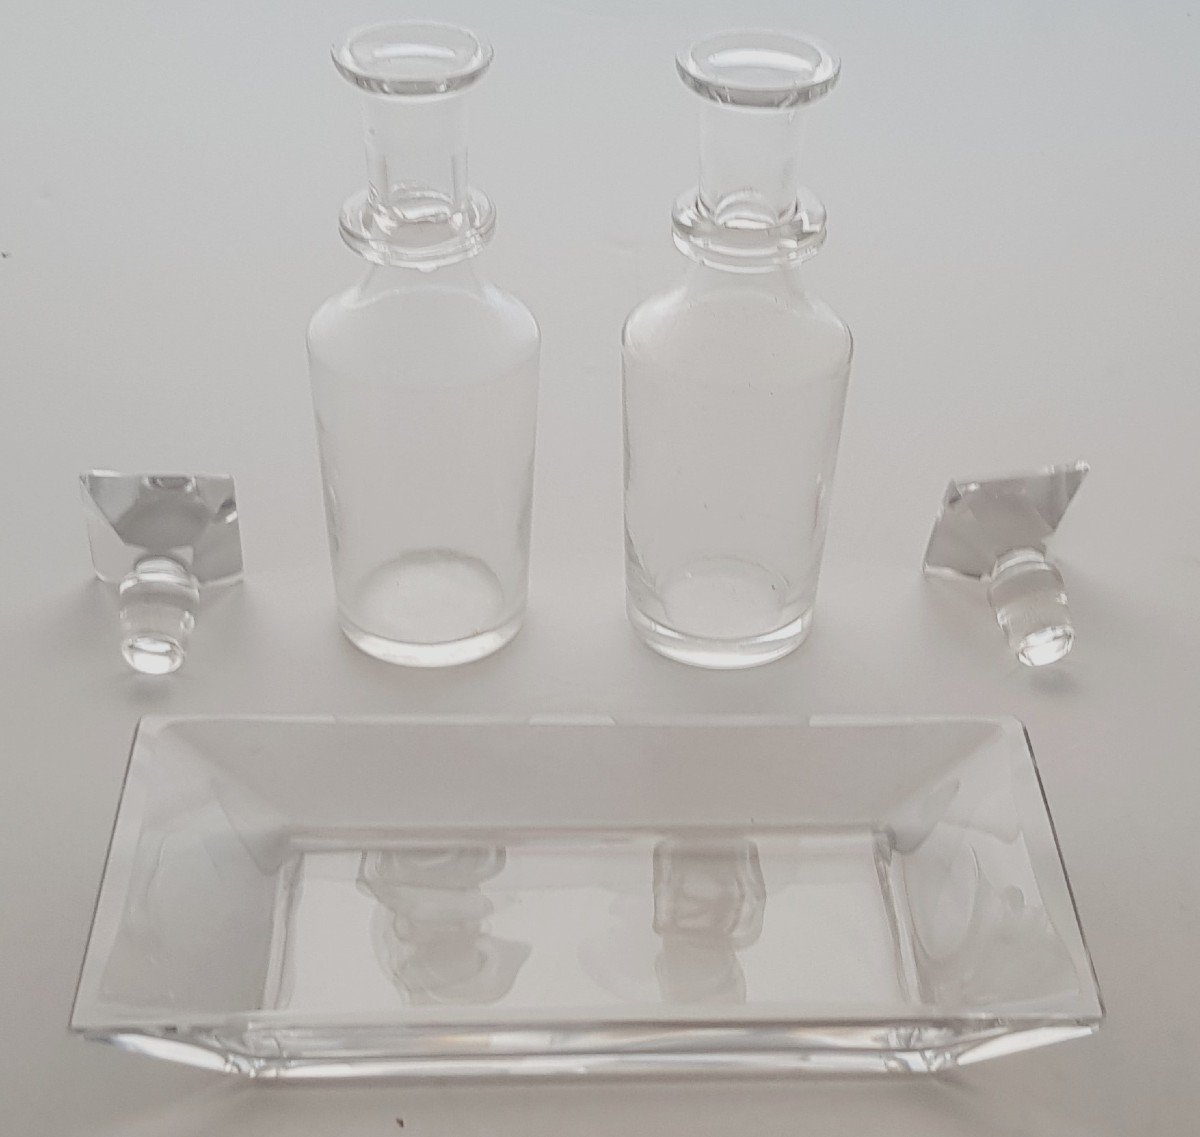 Old Servant Two Oil Cruets And Vinegar Bowl And Small Crystal Tray-photo-4